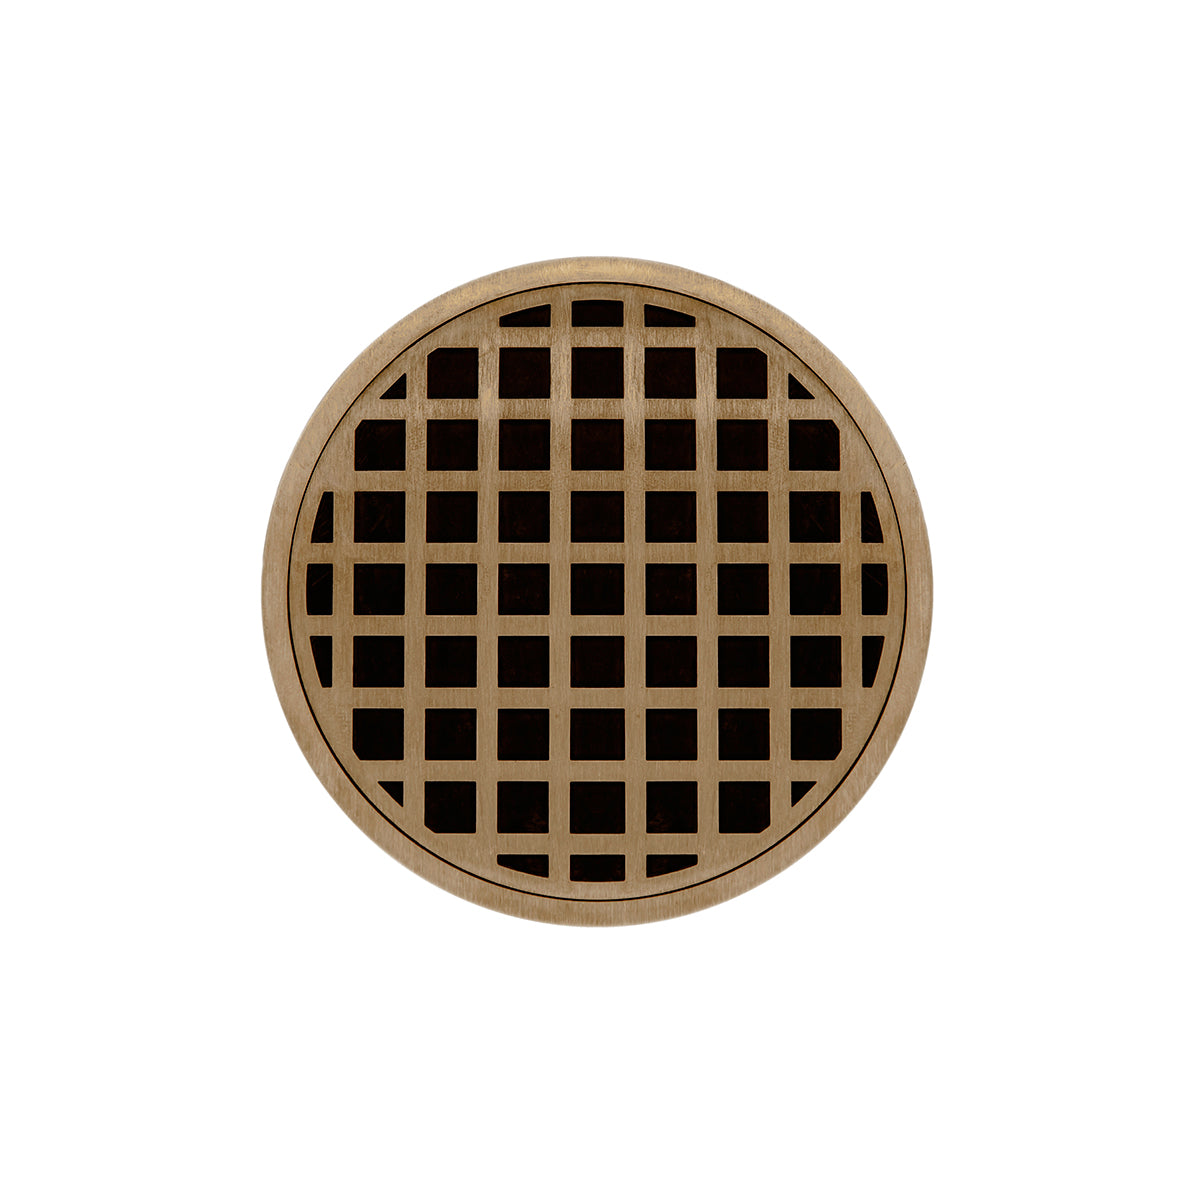 Infinity Drain 5" Round RQD 5 High Flow Premium Center Drain Kit with Squares Pattern Decorative Plate with ABS Drain Body, 3" Outlet